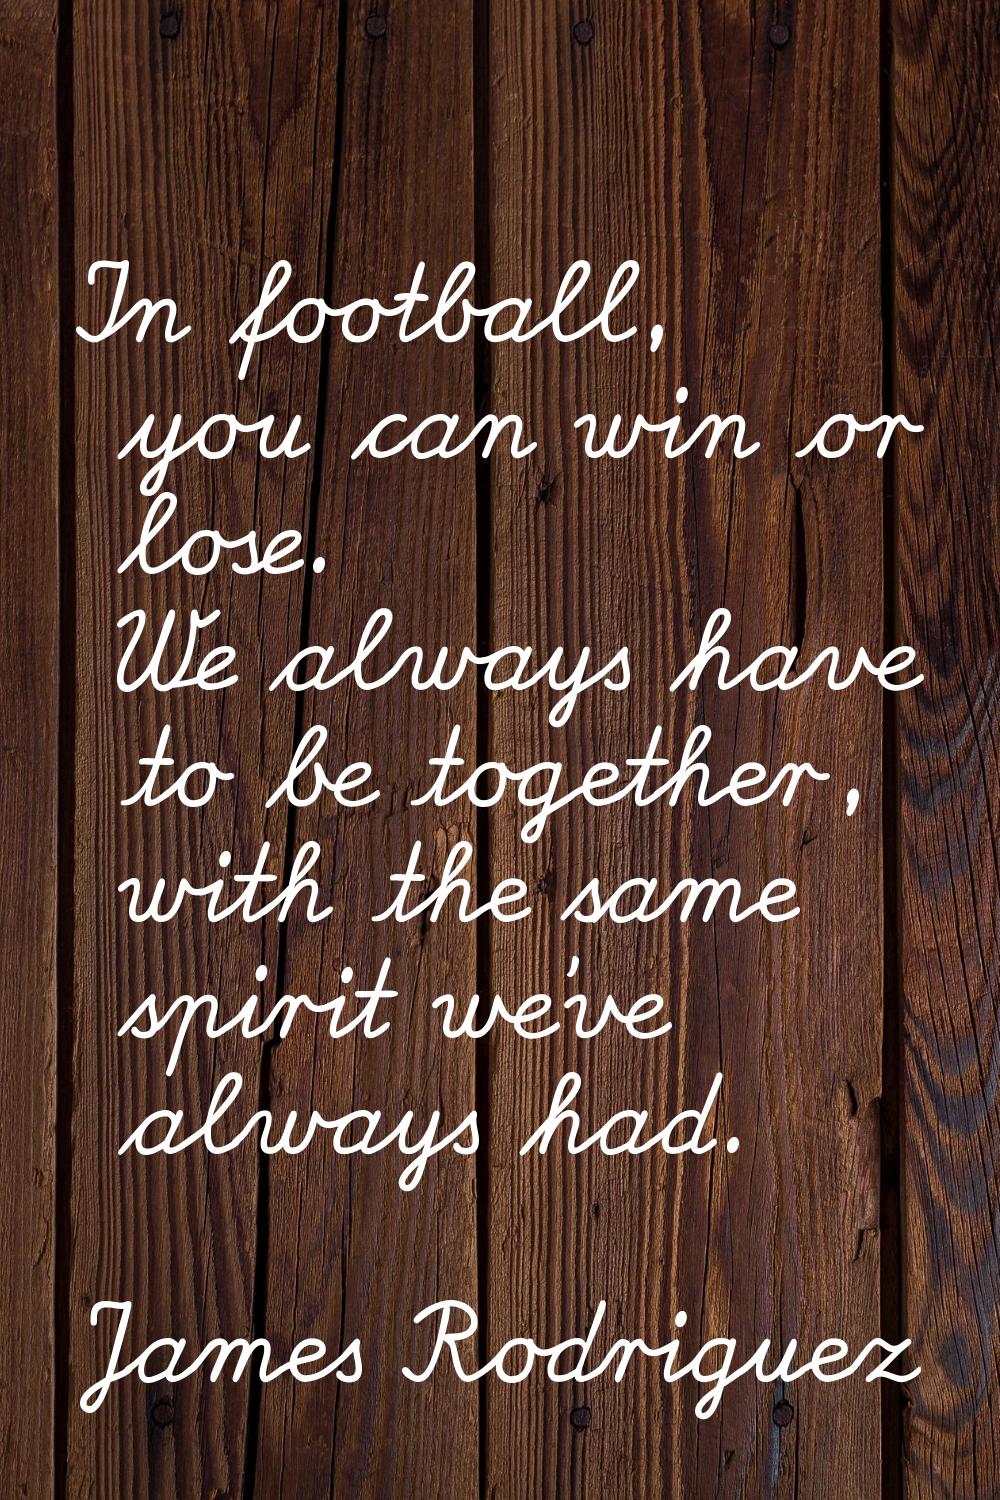 In football, you can win or lose. We always have to be together, with the same spirit we've always 